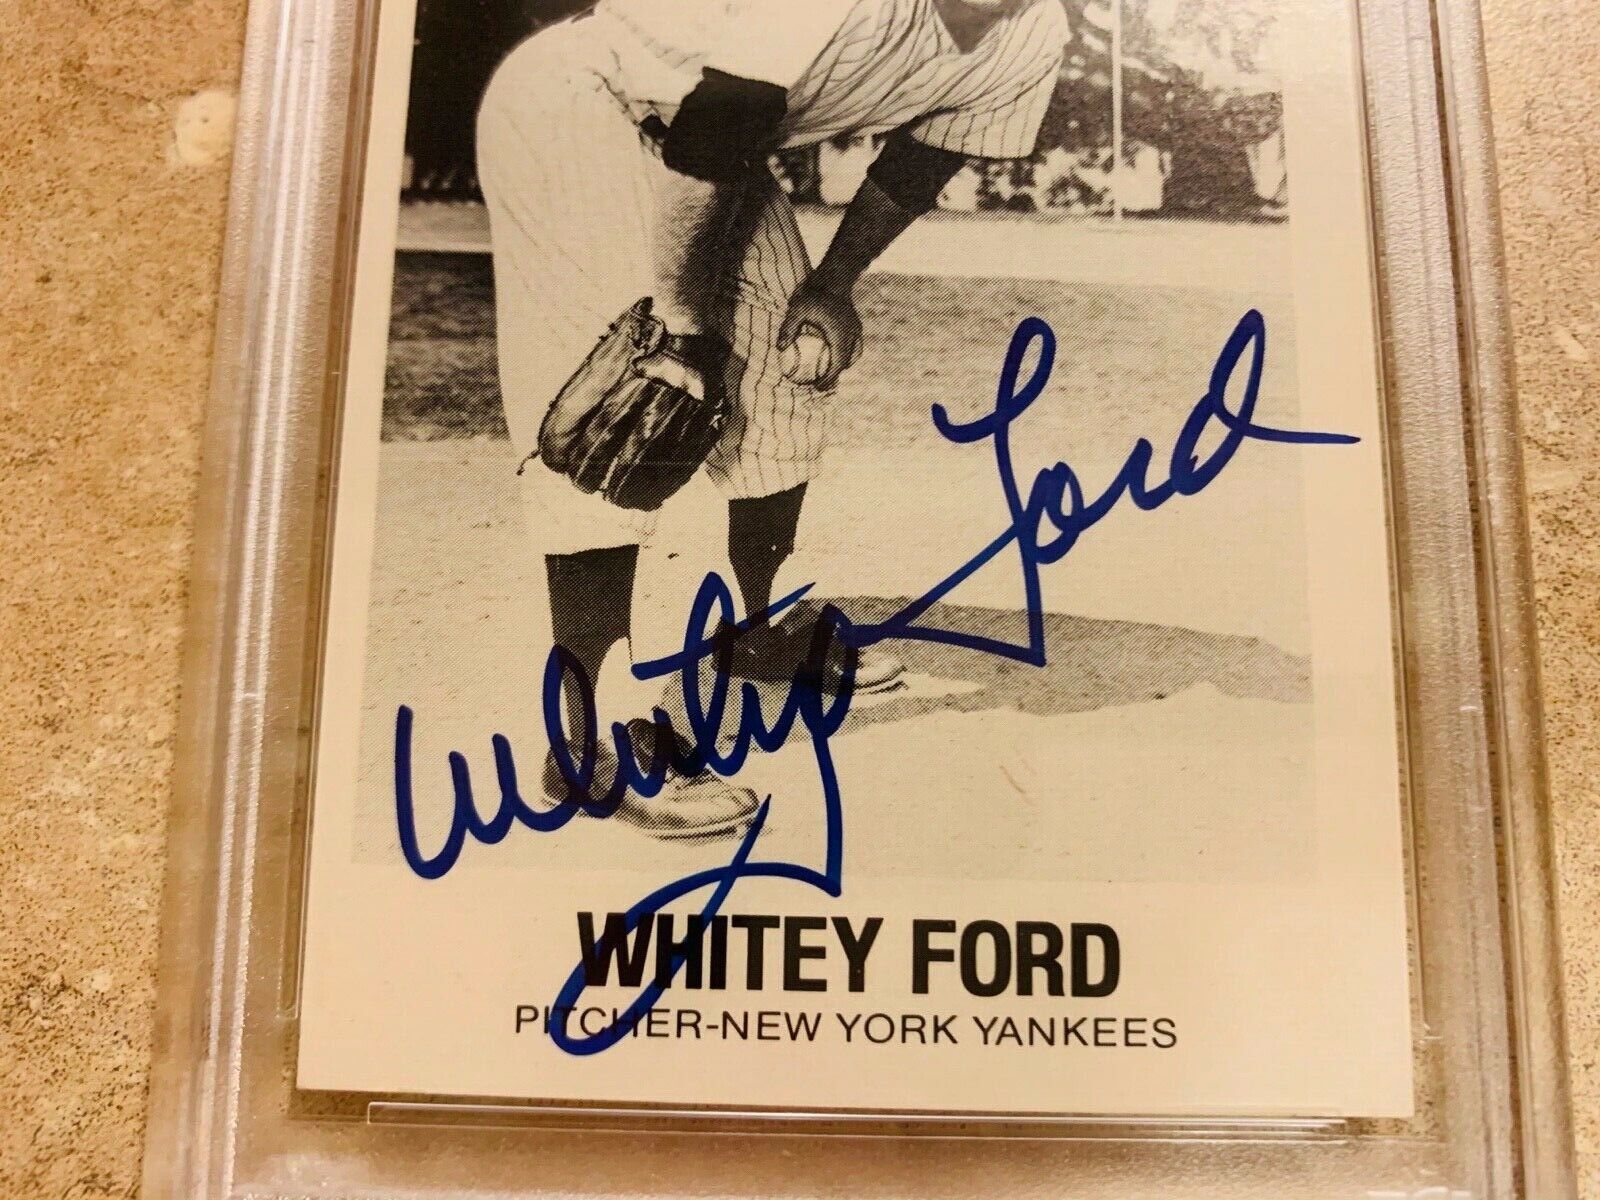 Whitey Ford Yankees 1977 TCMA Autographed Card 25 PSA Slabbed Certified